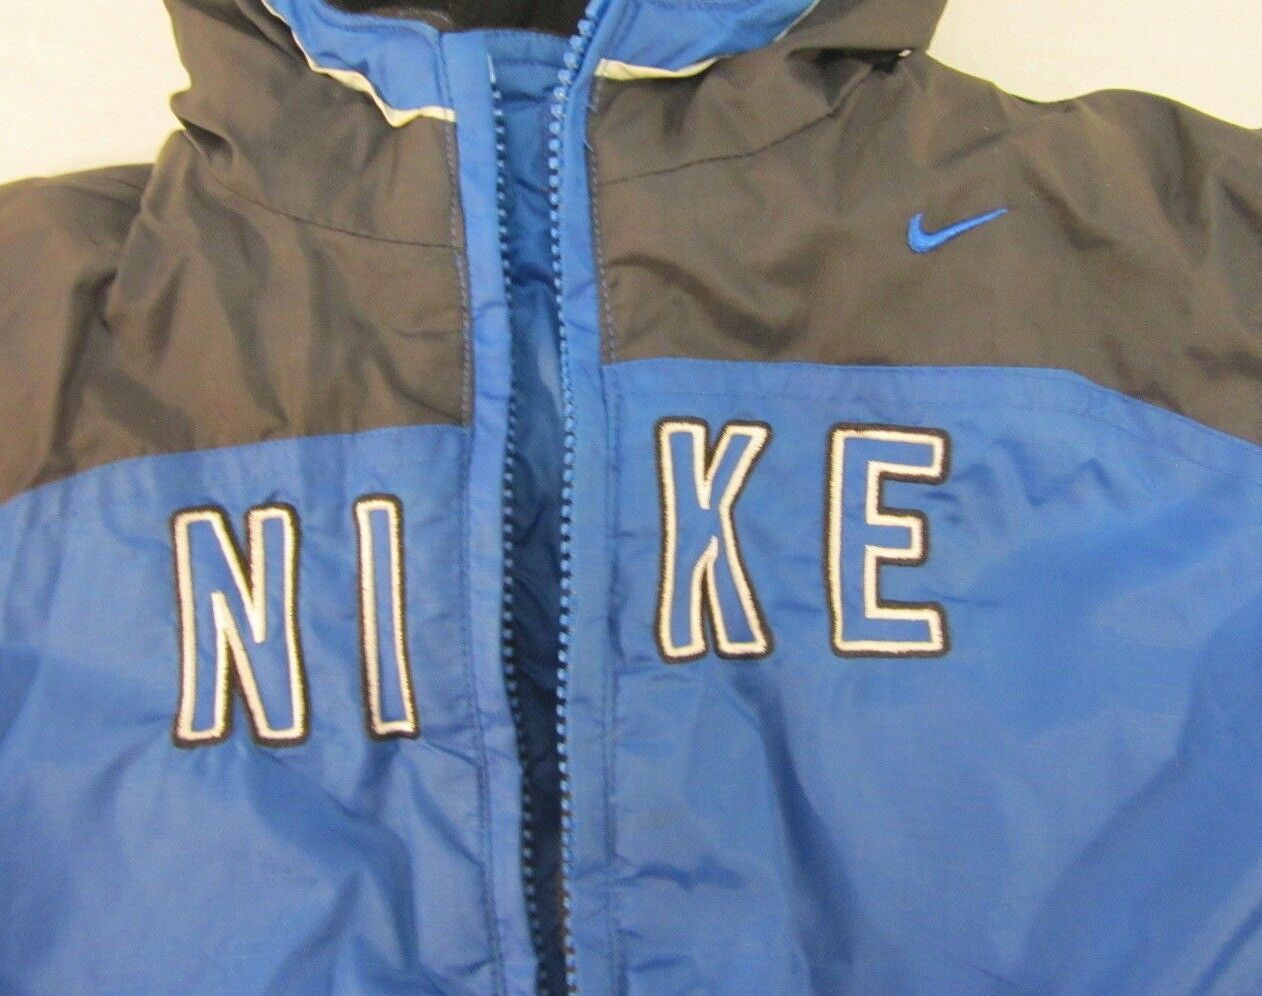 Primary image for NIKE THICK WINTER COAT BABY TODDLER 24 MONTHS BLUE REVERSIBLE W LINED WRISTS